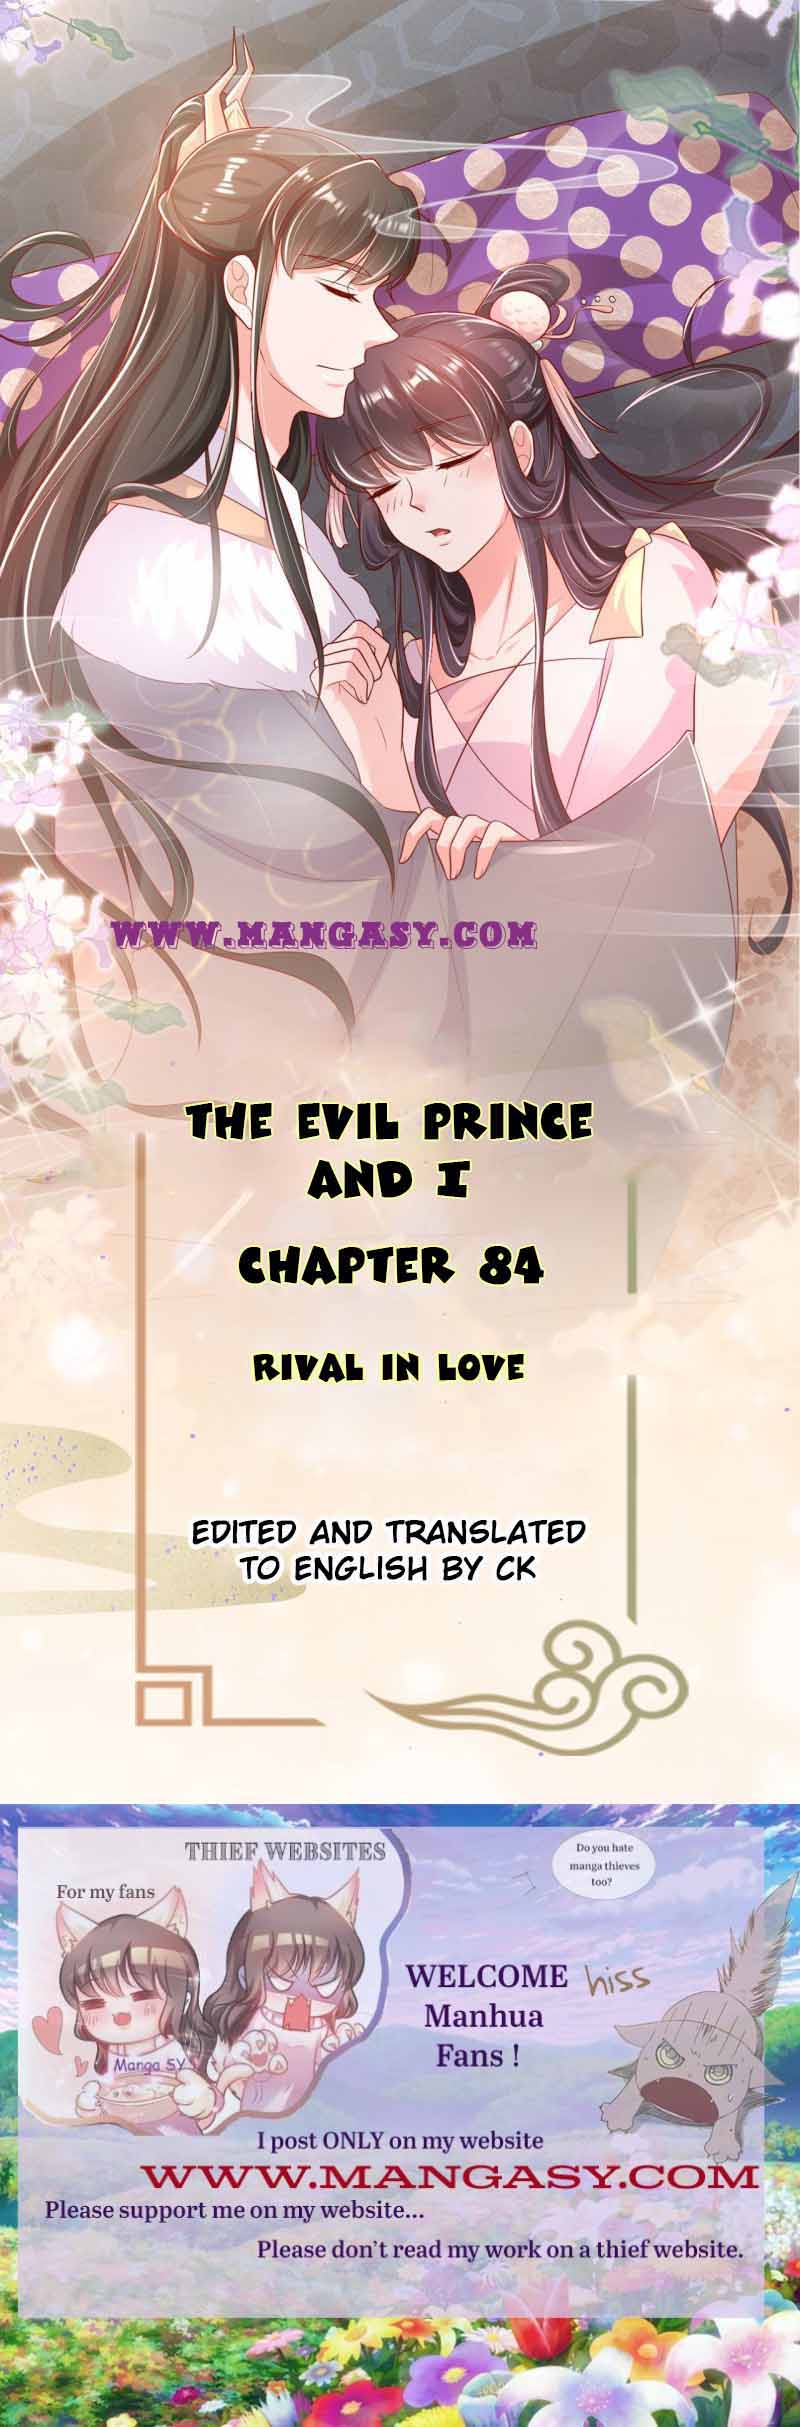 The Evil Prince And I - Page 1